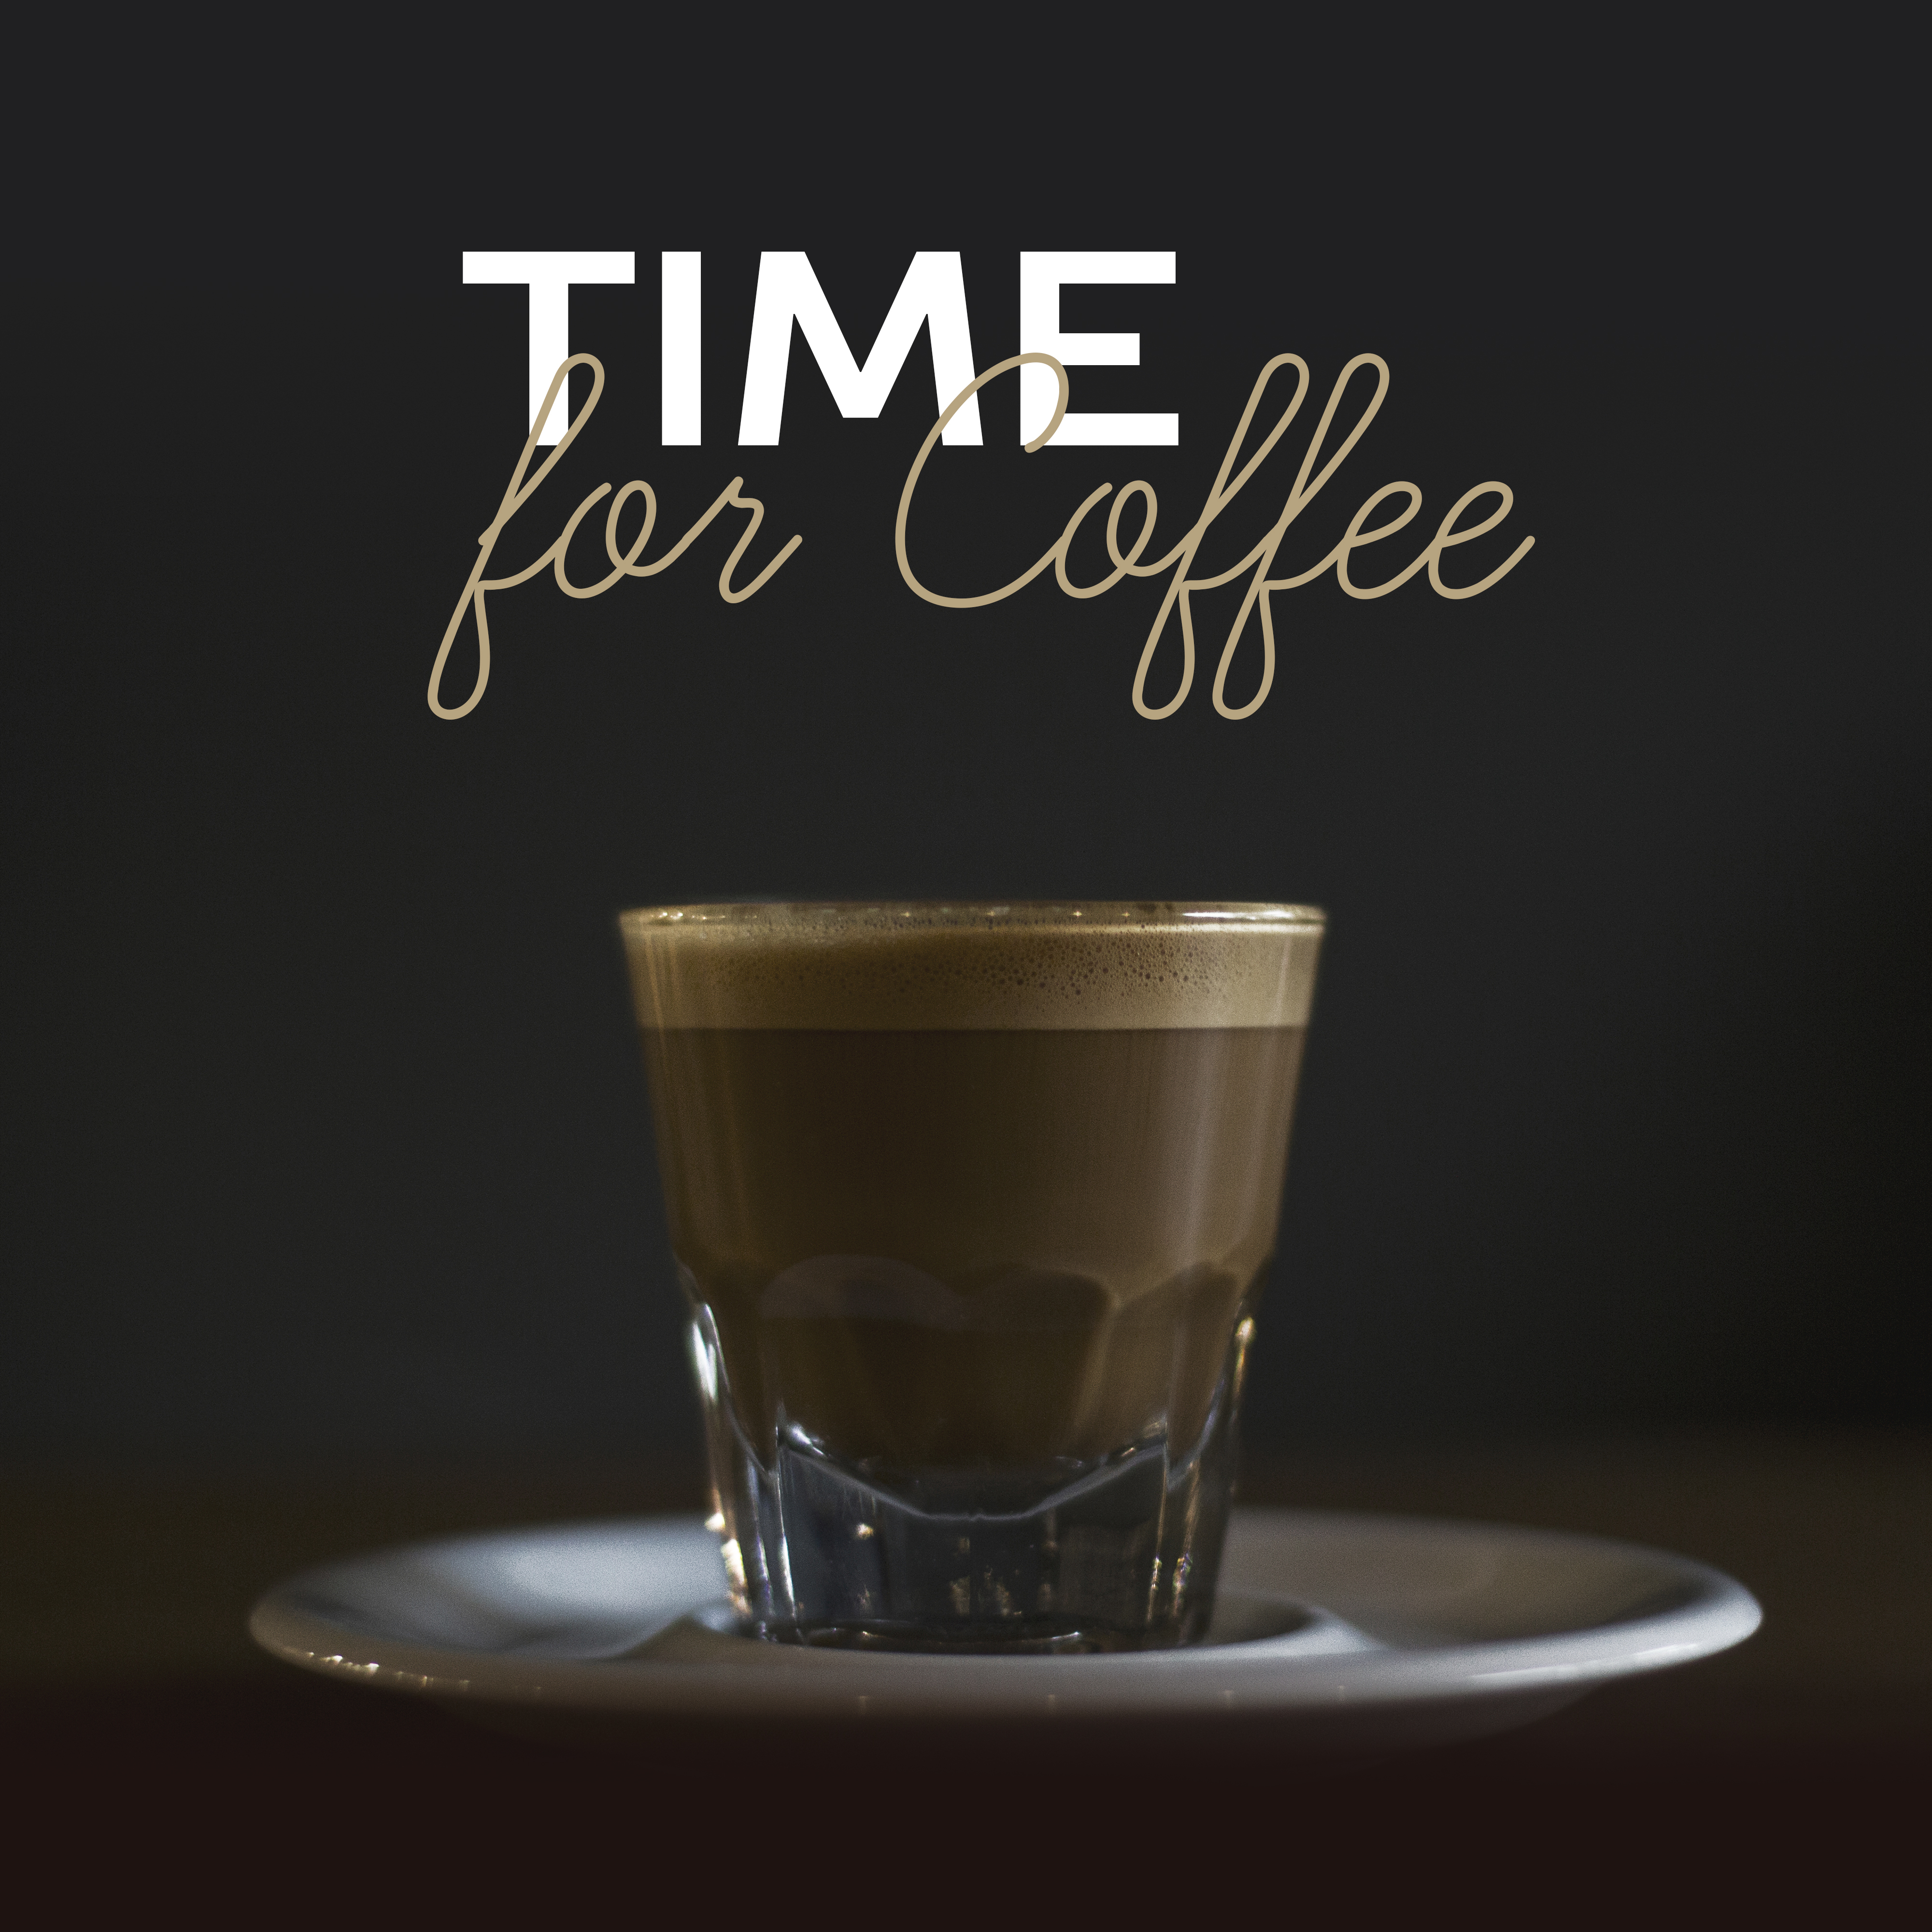 Time to Coffee – Restaurant Jazz Music, Piano for Relaxation, Jazz Cafe, Meeting with Friends, Saturday Afternoon, Best Smooth Jazz